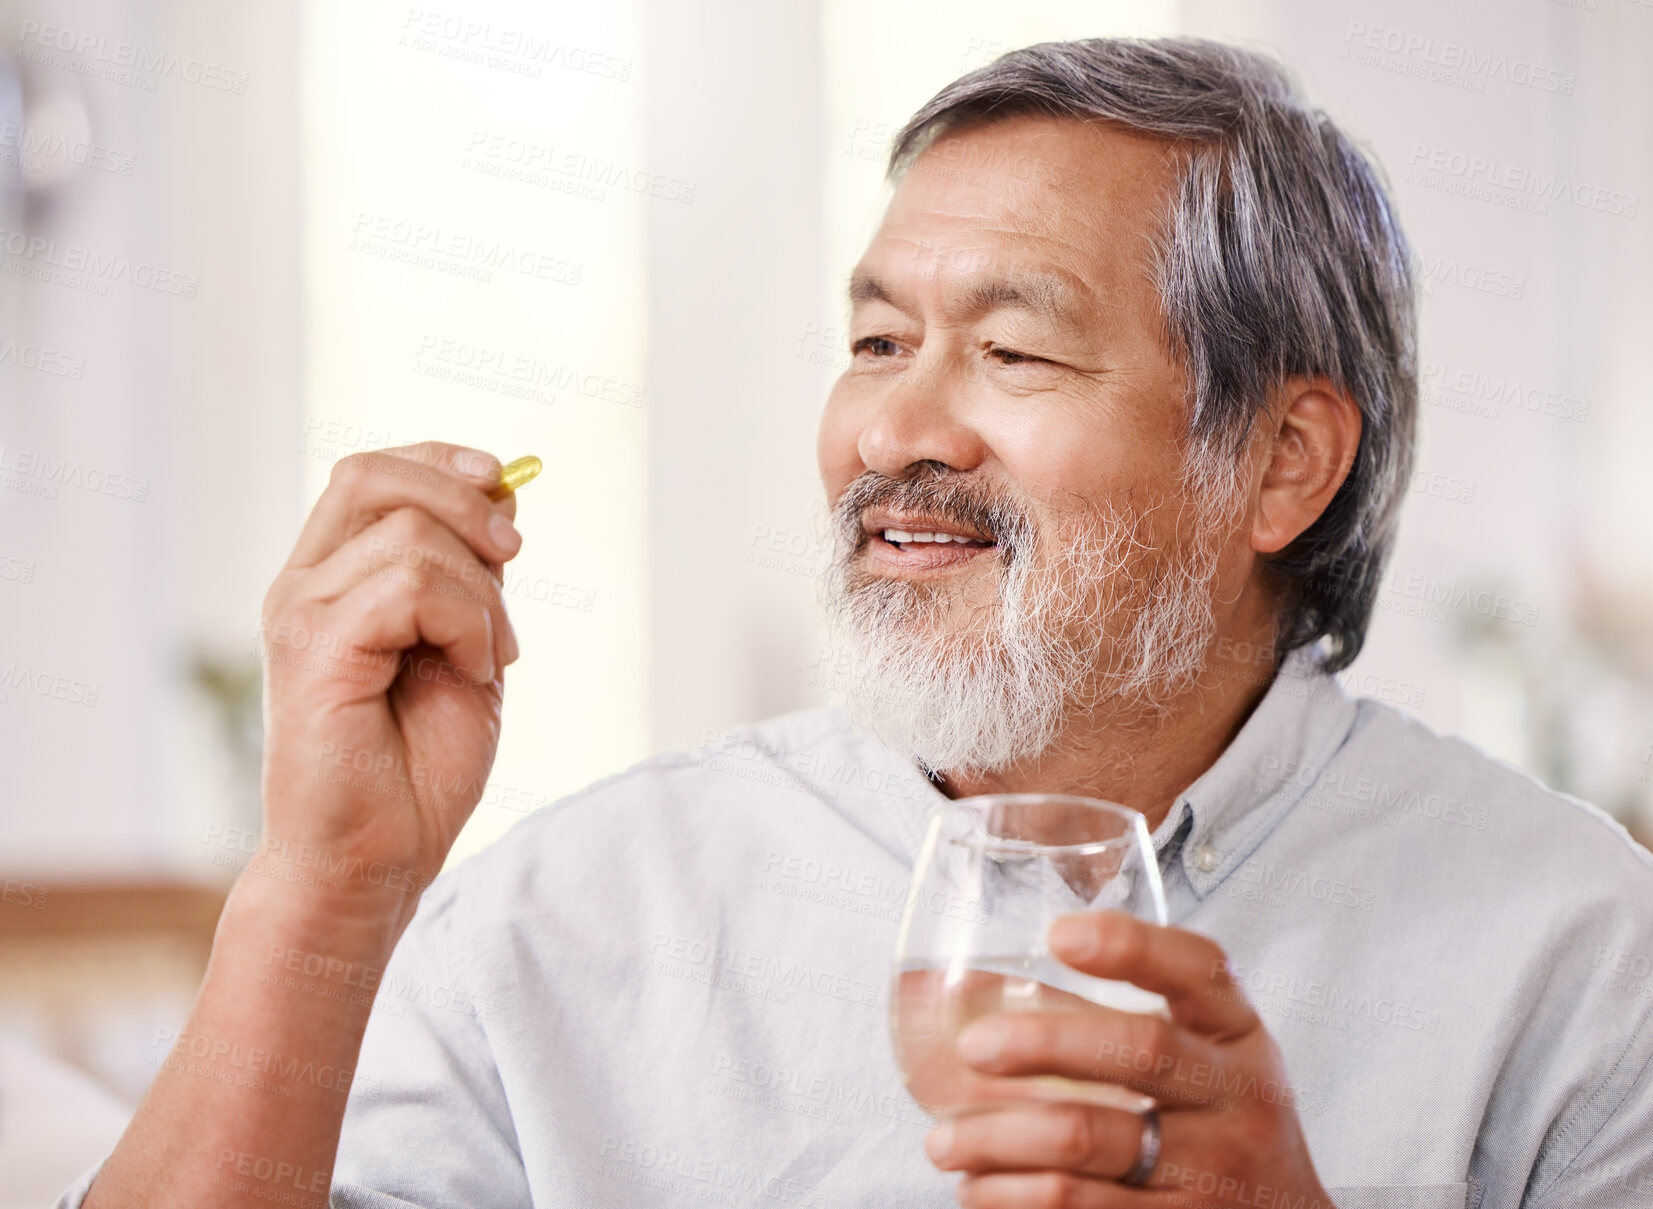 Buy stock photo Shot of a senior man holding medication and a glass of water